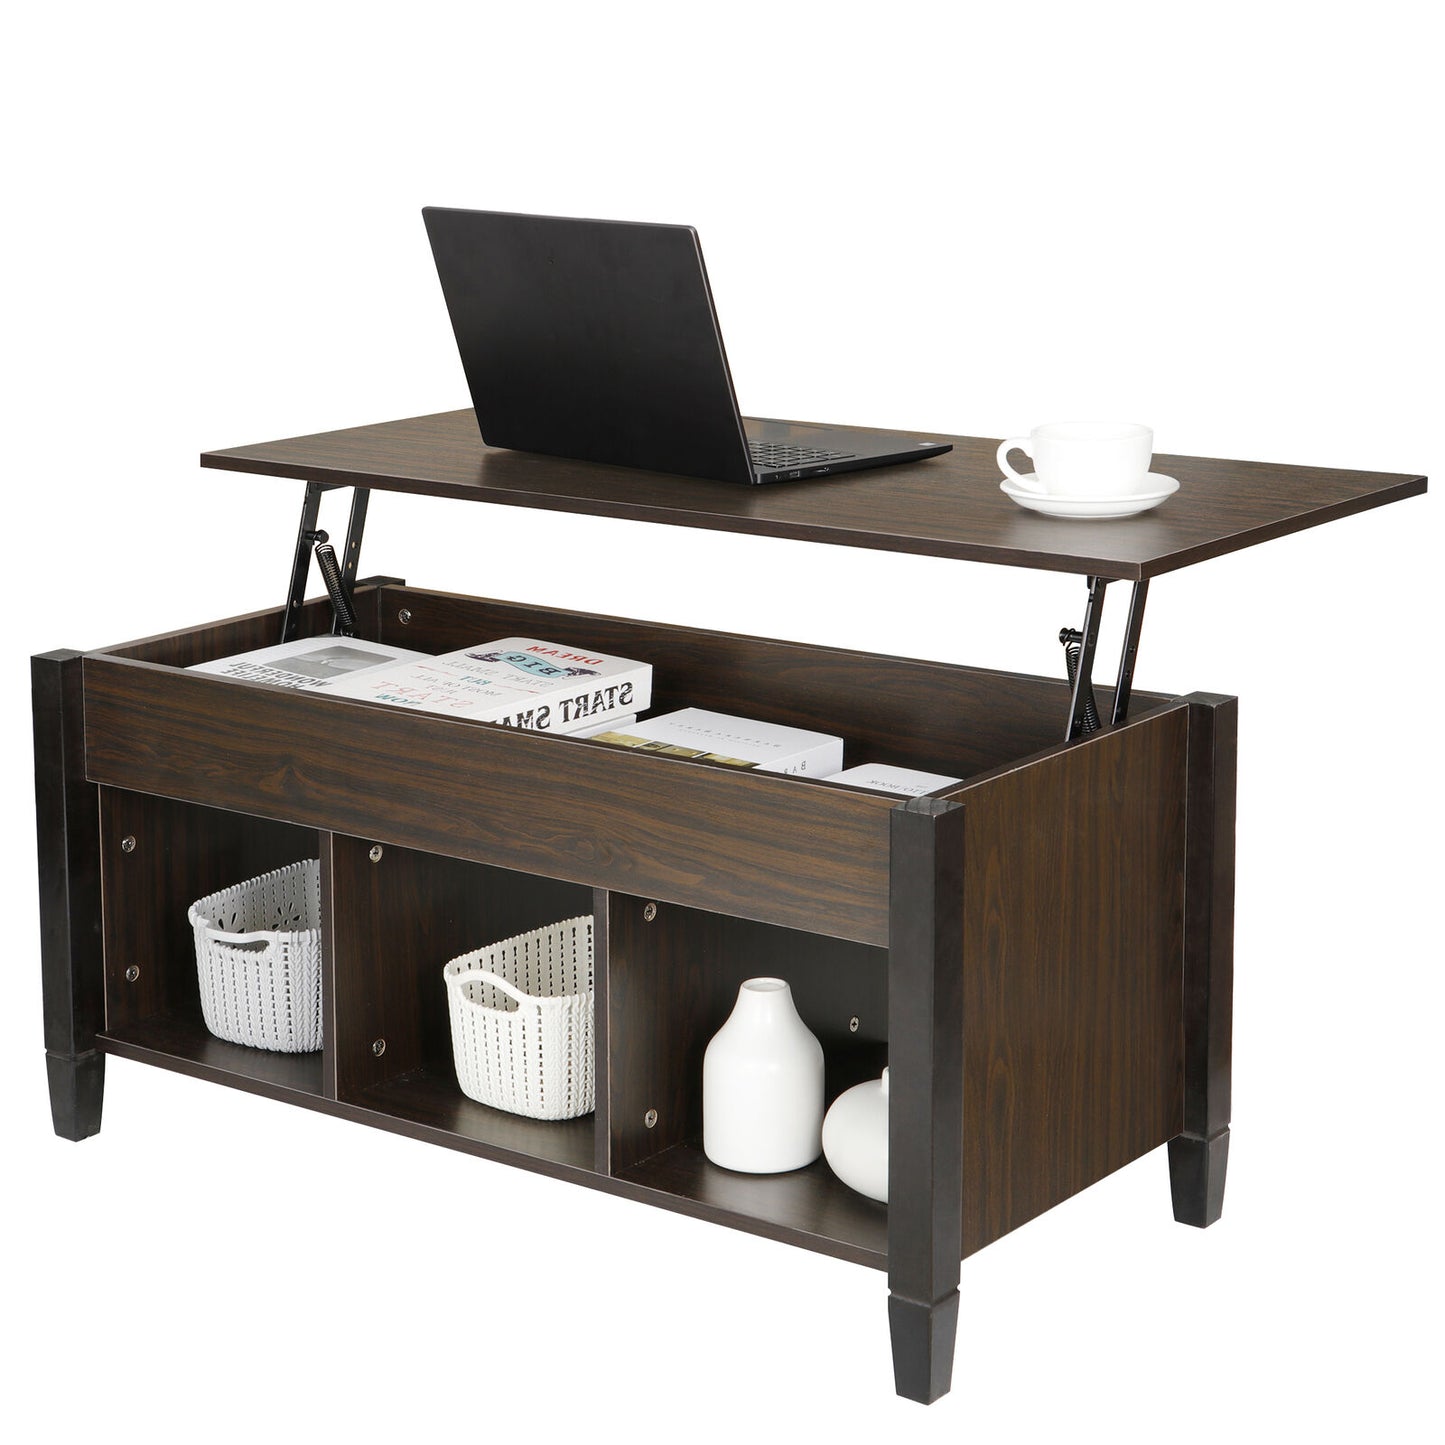 Lift Top Coffee Table with Hidden Storage Compartment Shelf for Living Room